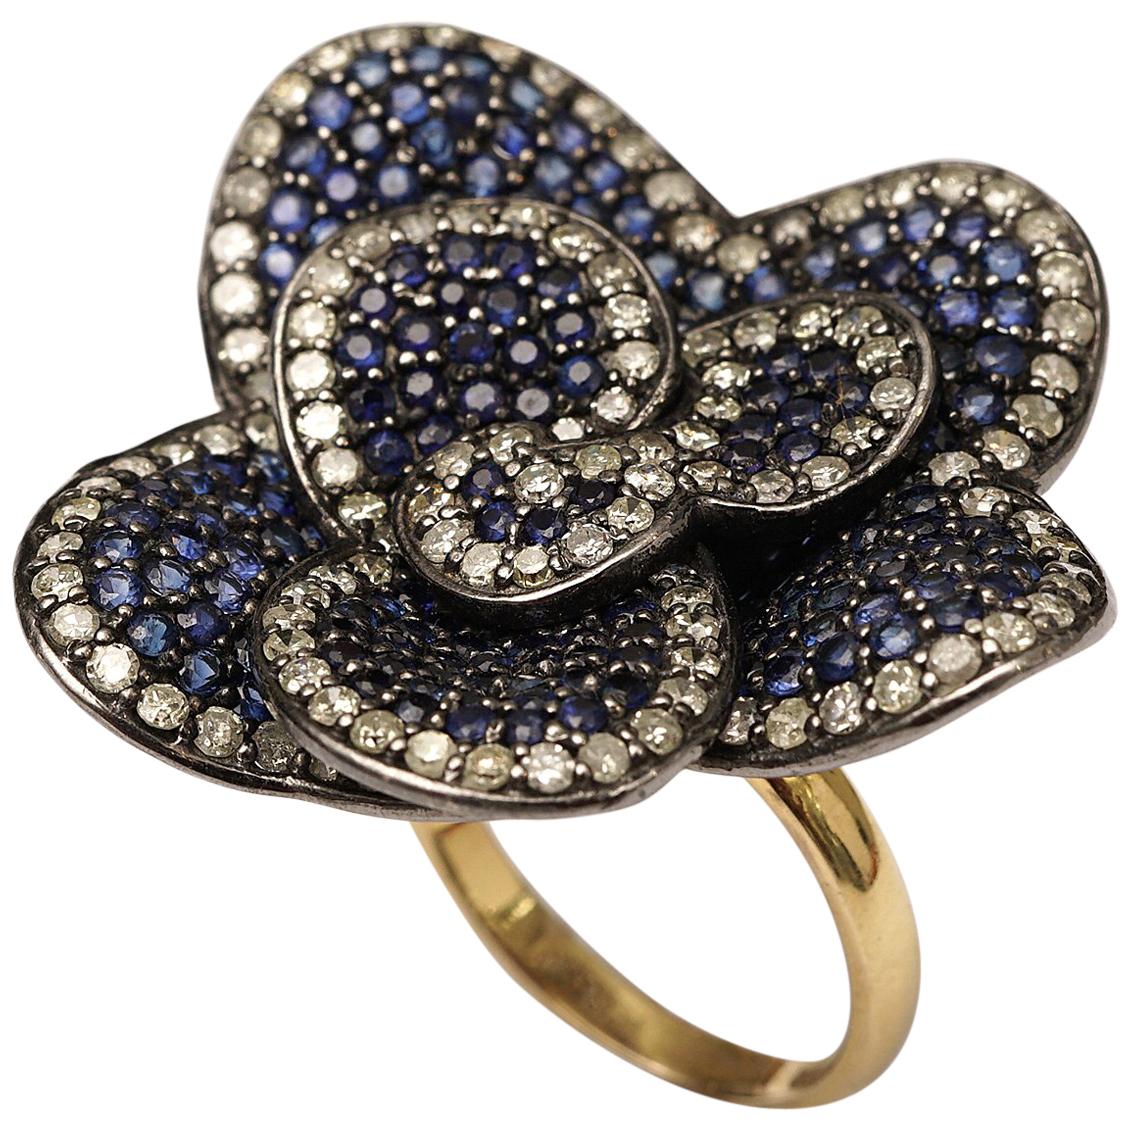 Flower Ring of Pave`-Set Blue Sapphires and Diamonds, Gold Band